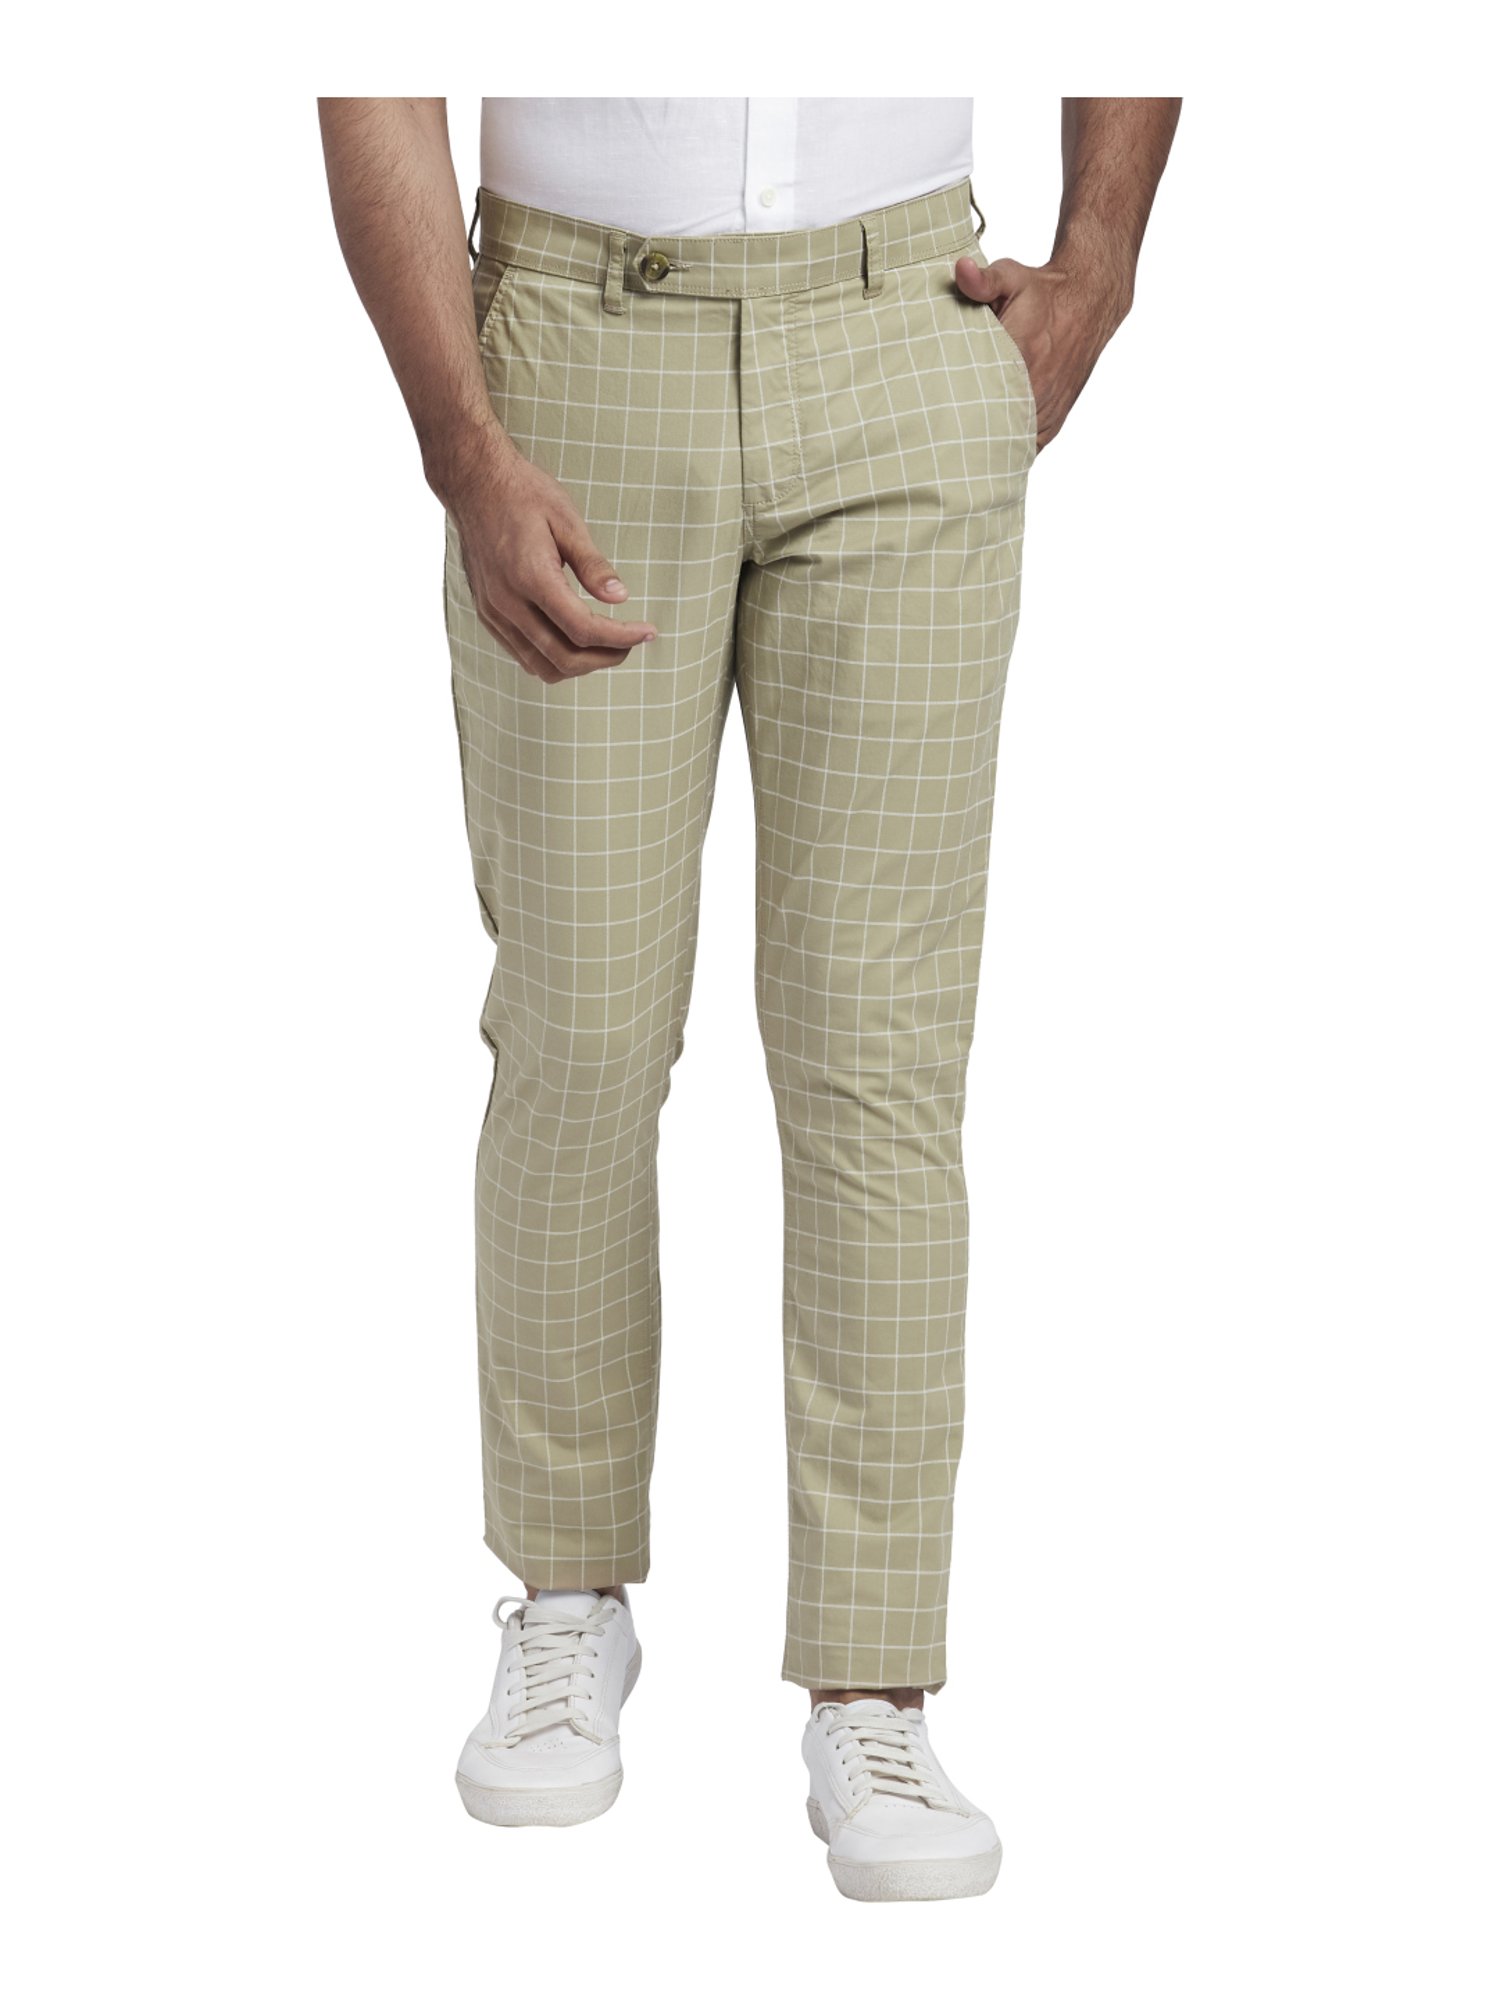 Buy online Beige Checkered Chinos from Bottom Wear for Men by Bukkl for  899 at 70 off  2023 Limeroadcom